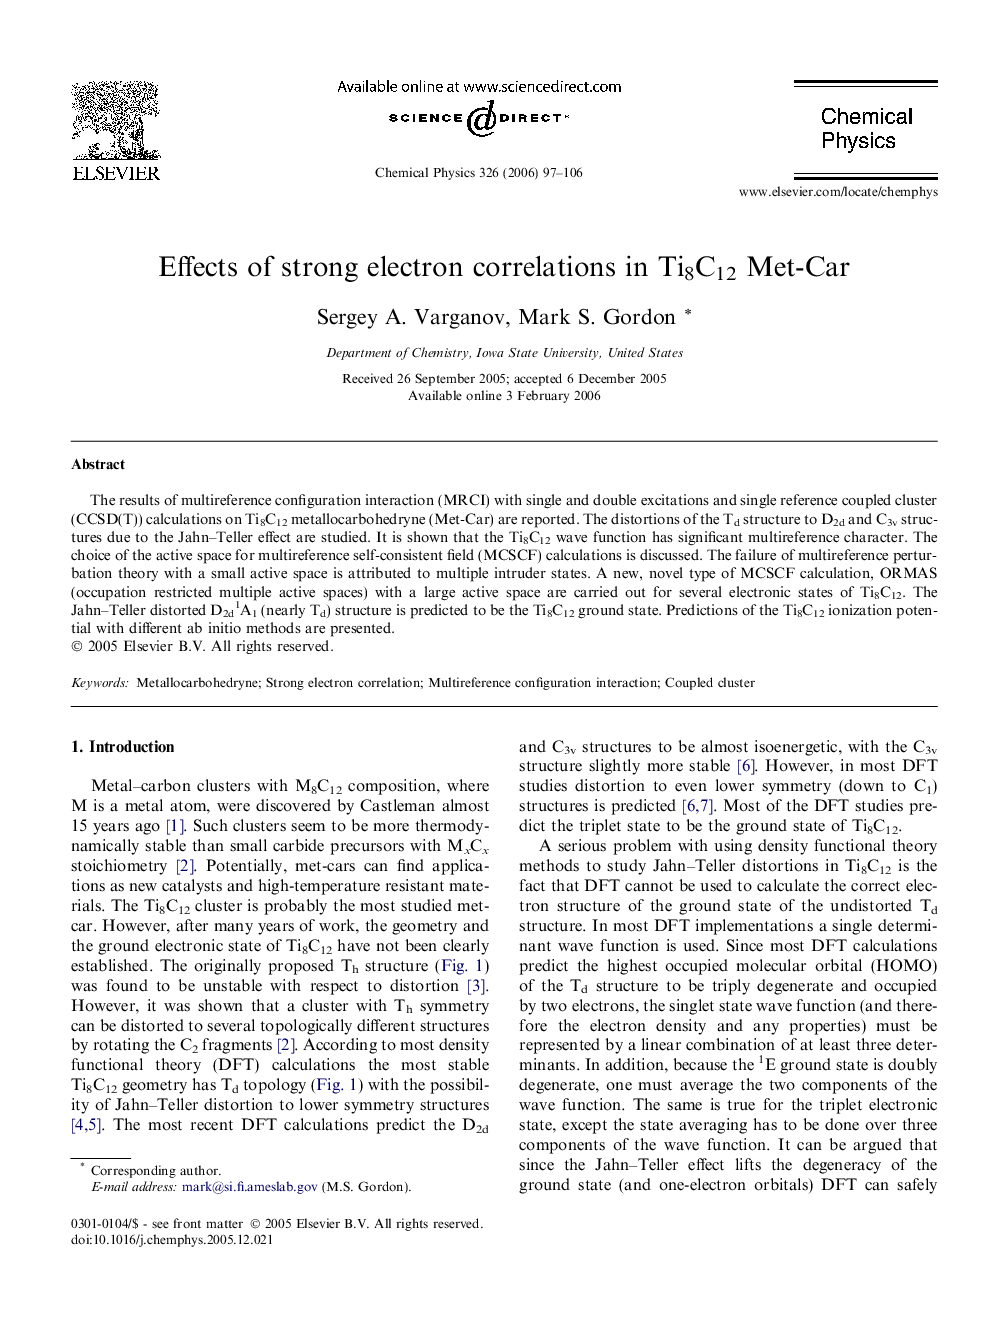 Effects of strong electron correlations in Ti8C12 Met-Car